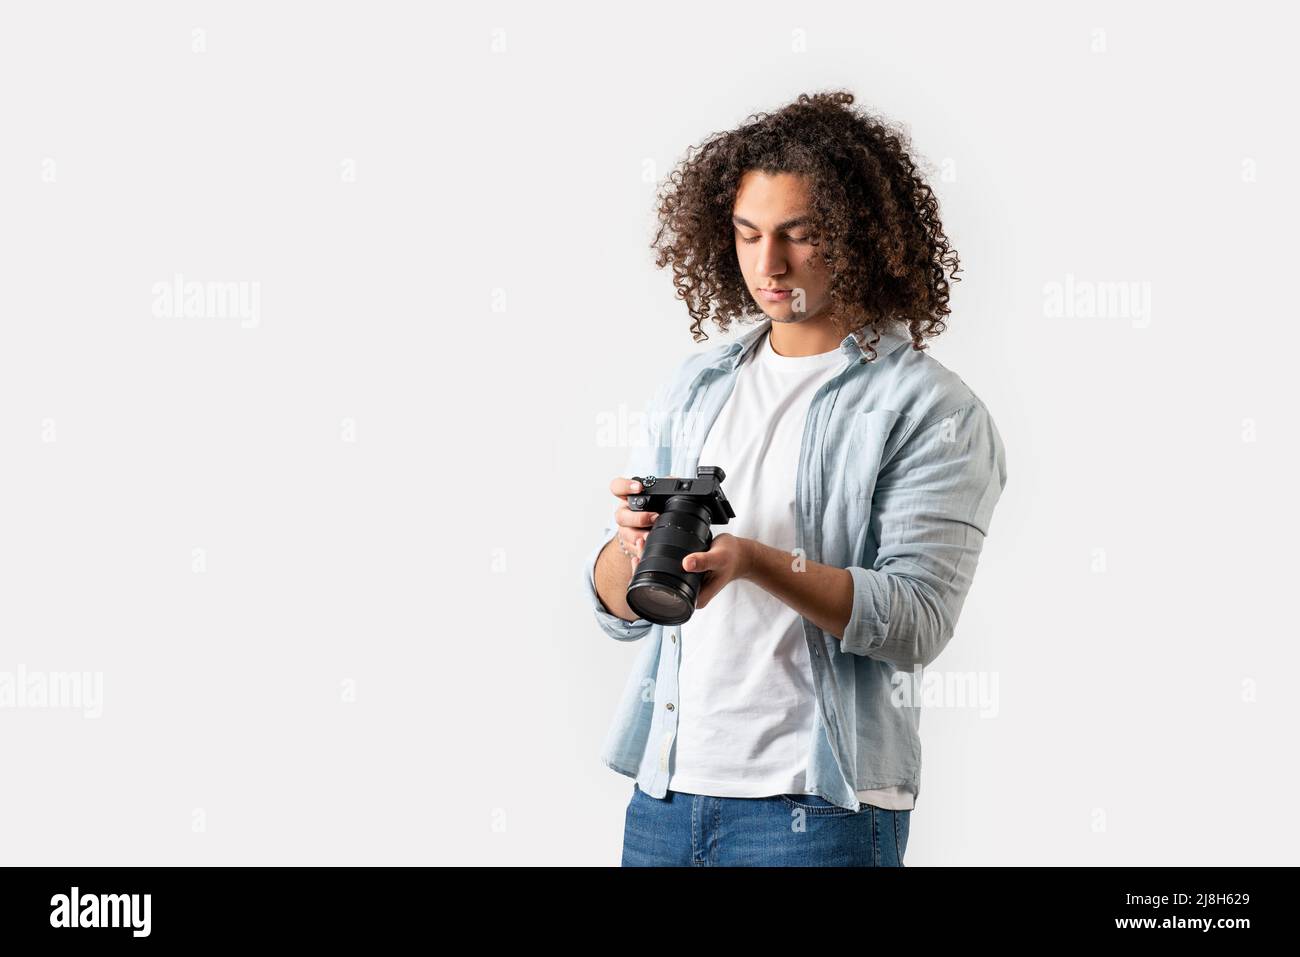 Young man with curly hair is holding a camera on his hand. Hobby and photography concept. High quality photo Stock Photo